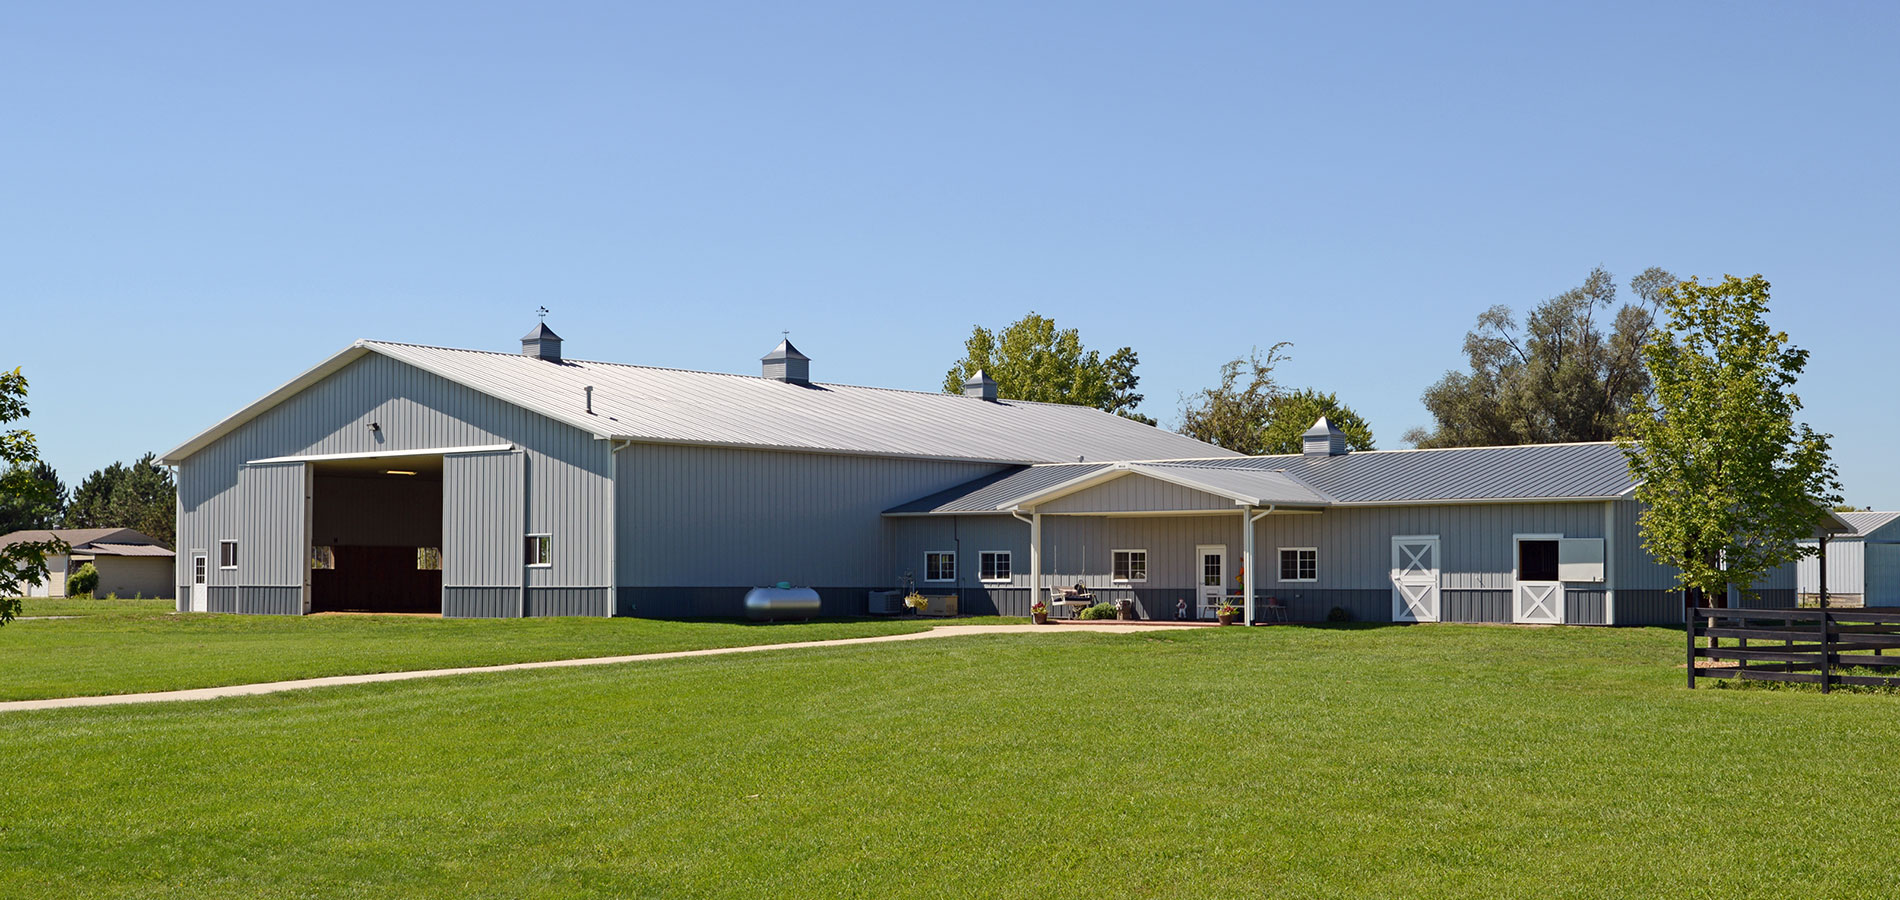 Equestrian Barns, Riding Areas and horse boarding 